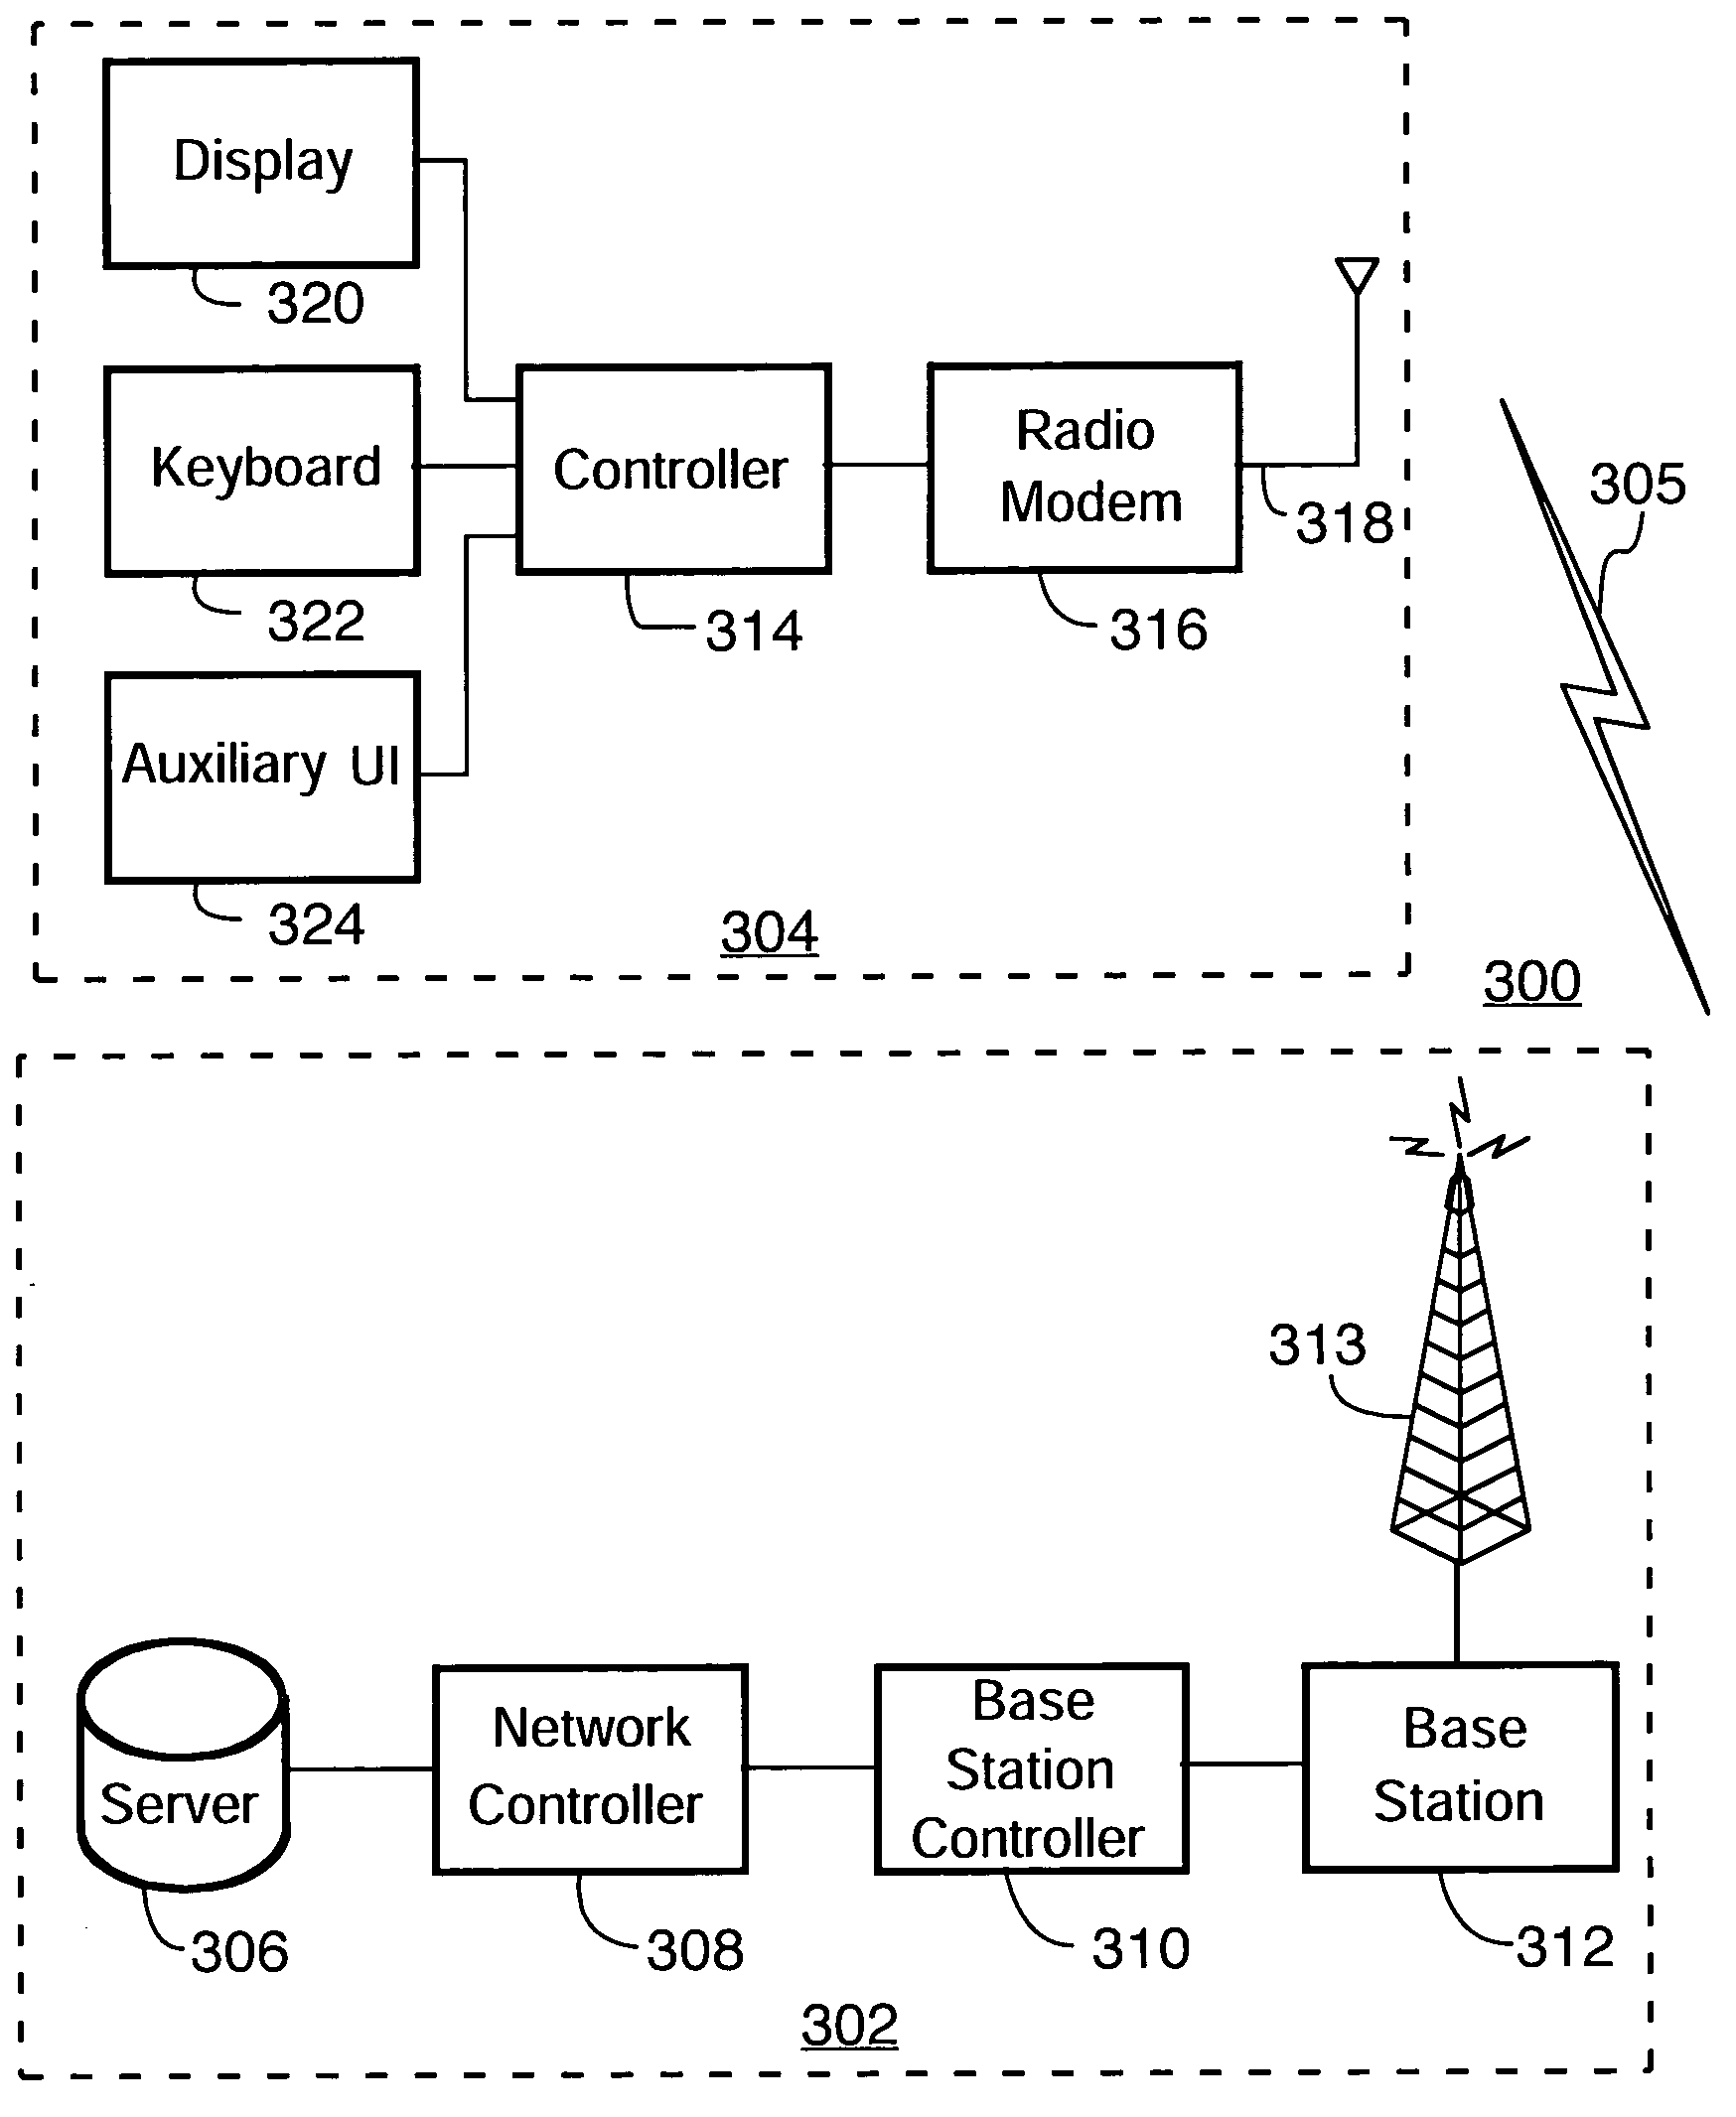 Contact management for mobile communication devices in wireless packet switched networks